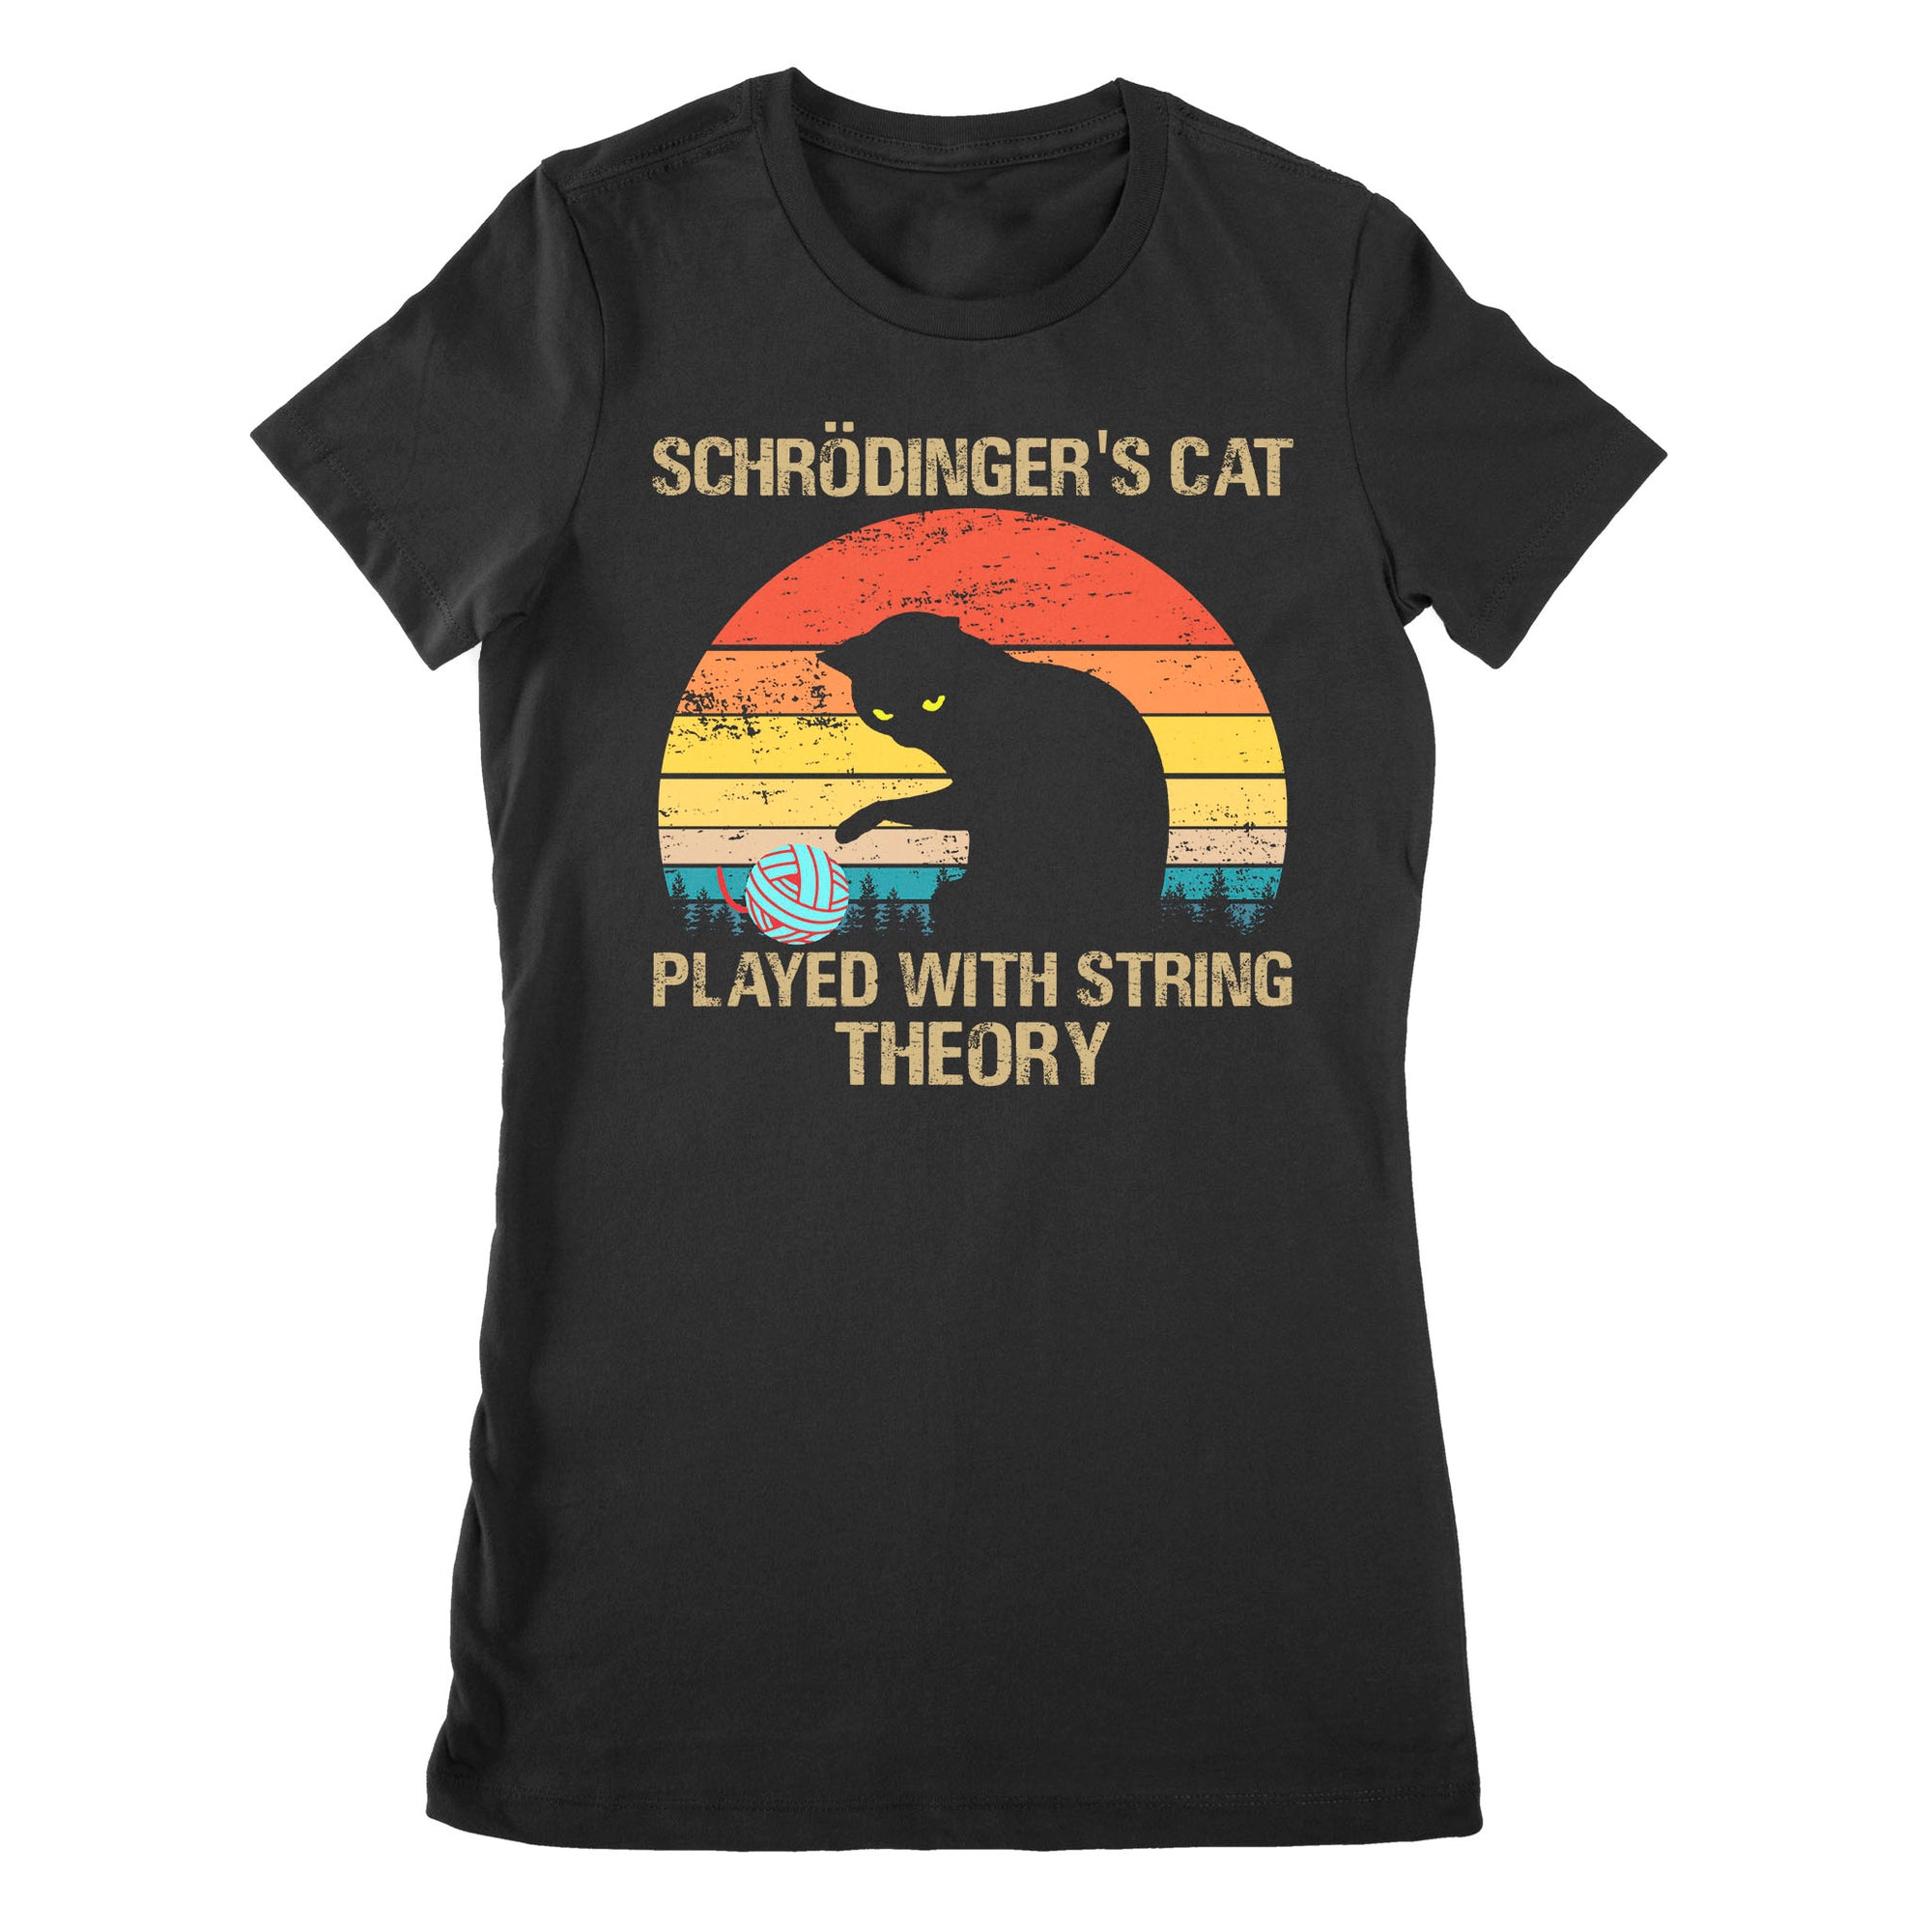 Premium Women's T-shirt - Schrodinger’s Cat Played With String Theory